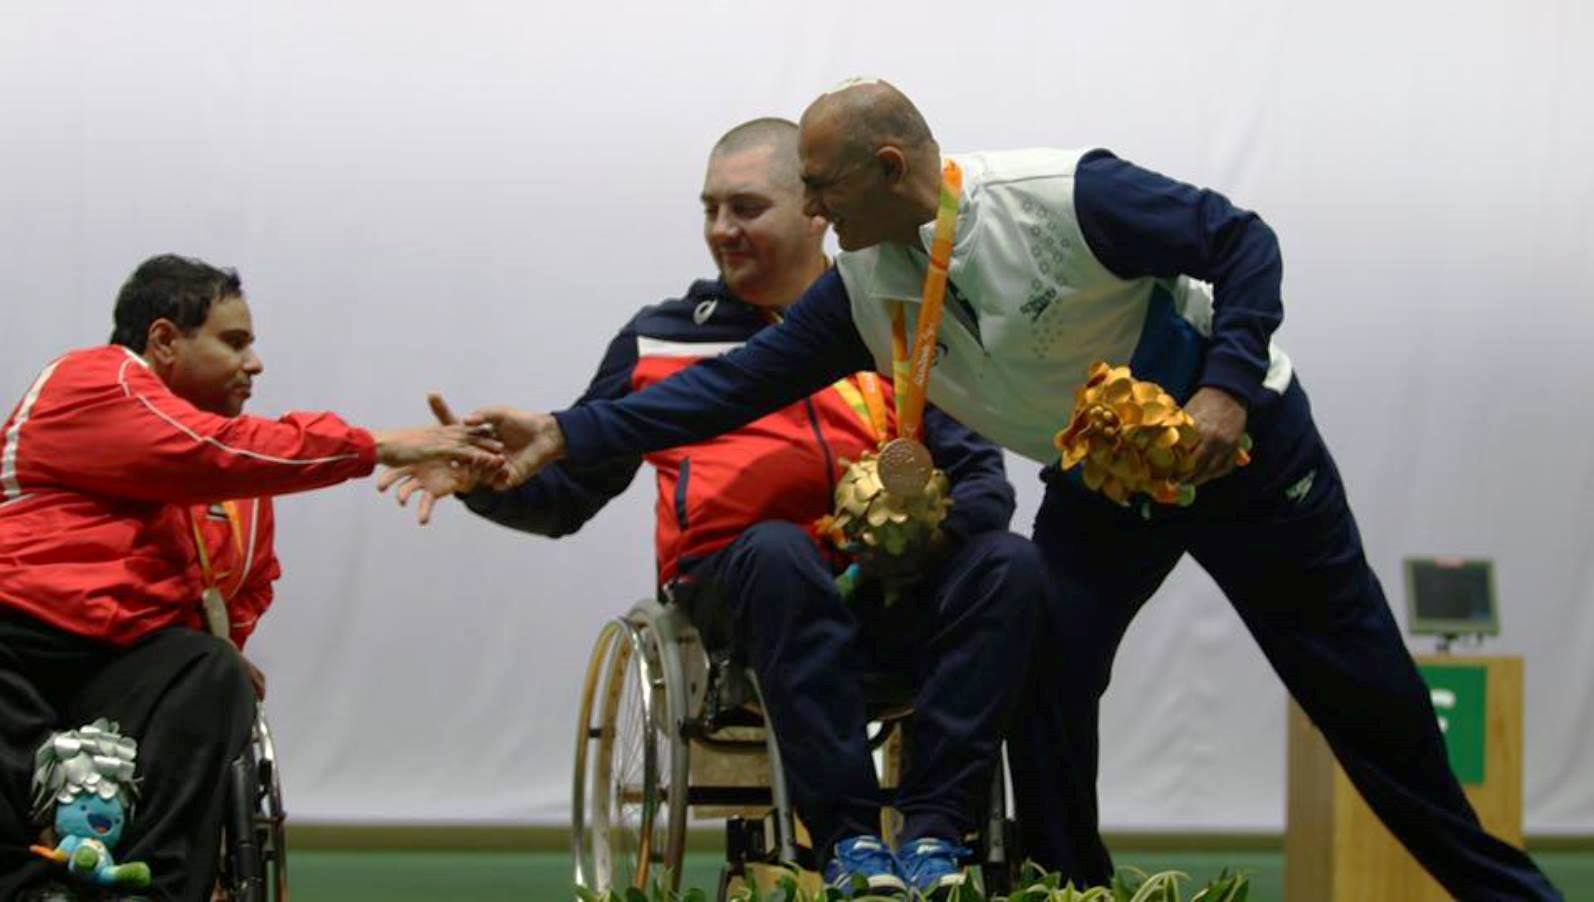 Bronze medalist Doron Shaziri of Israel extending a hand to silver medalist Abdullah Sultan al-Aryani of the United Arab Emirates. Photo by Keren Isaacson/Israel Paralympic Committee